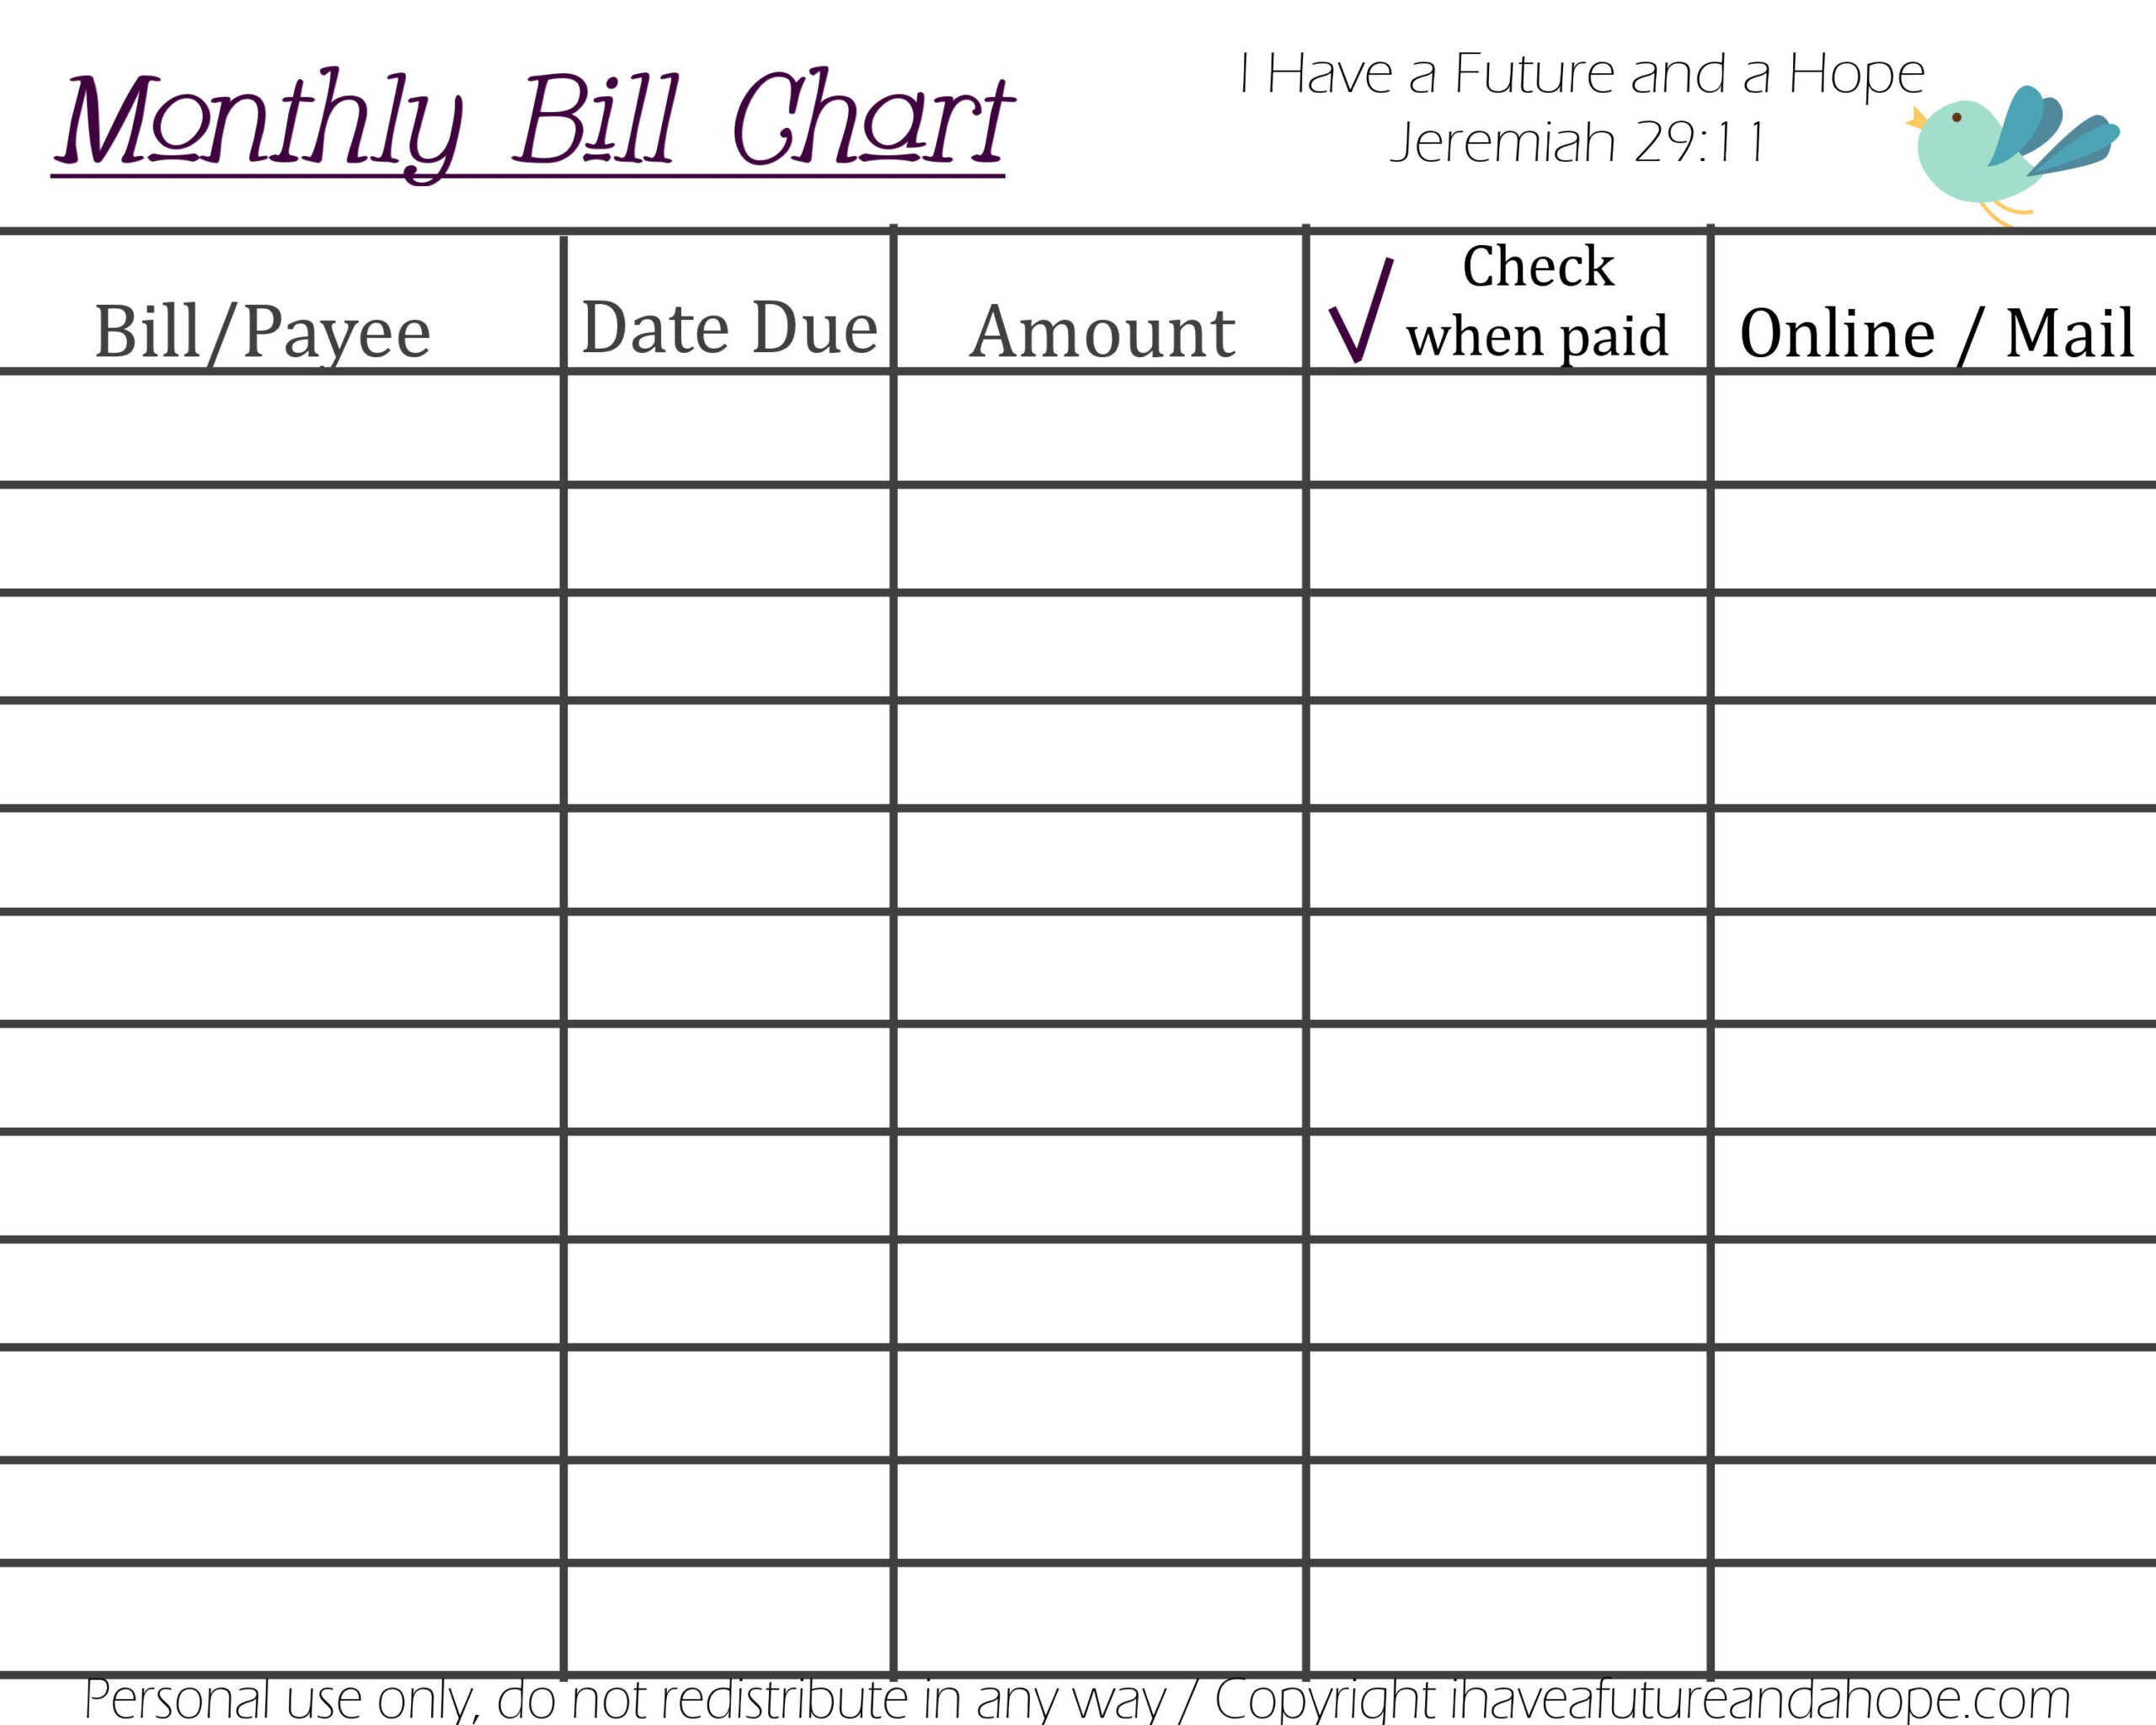 Printable Monthly Bill Chart | Paying Bills, Budget in Free Printable Monthly Bill Chart